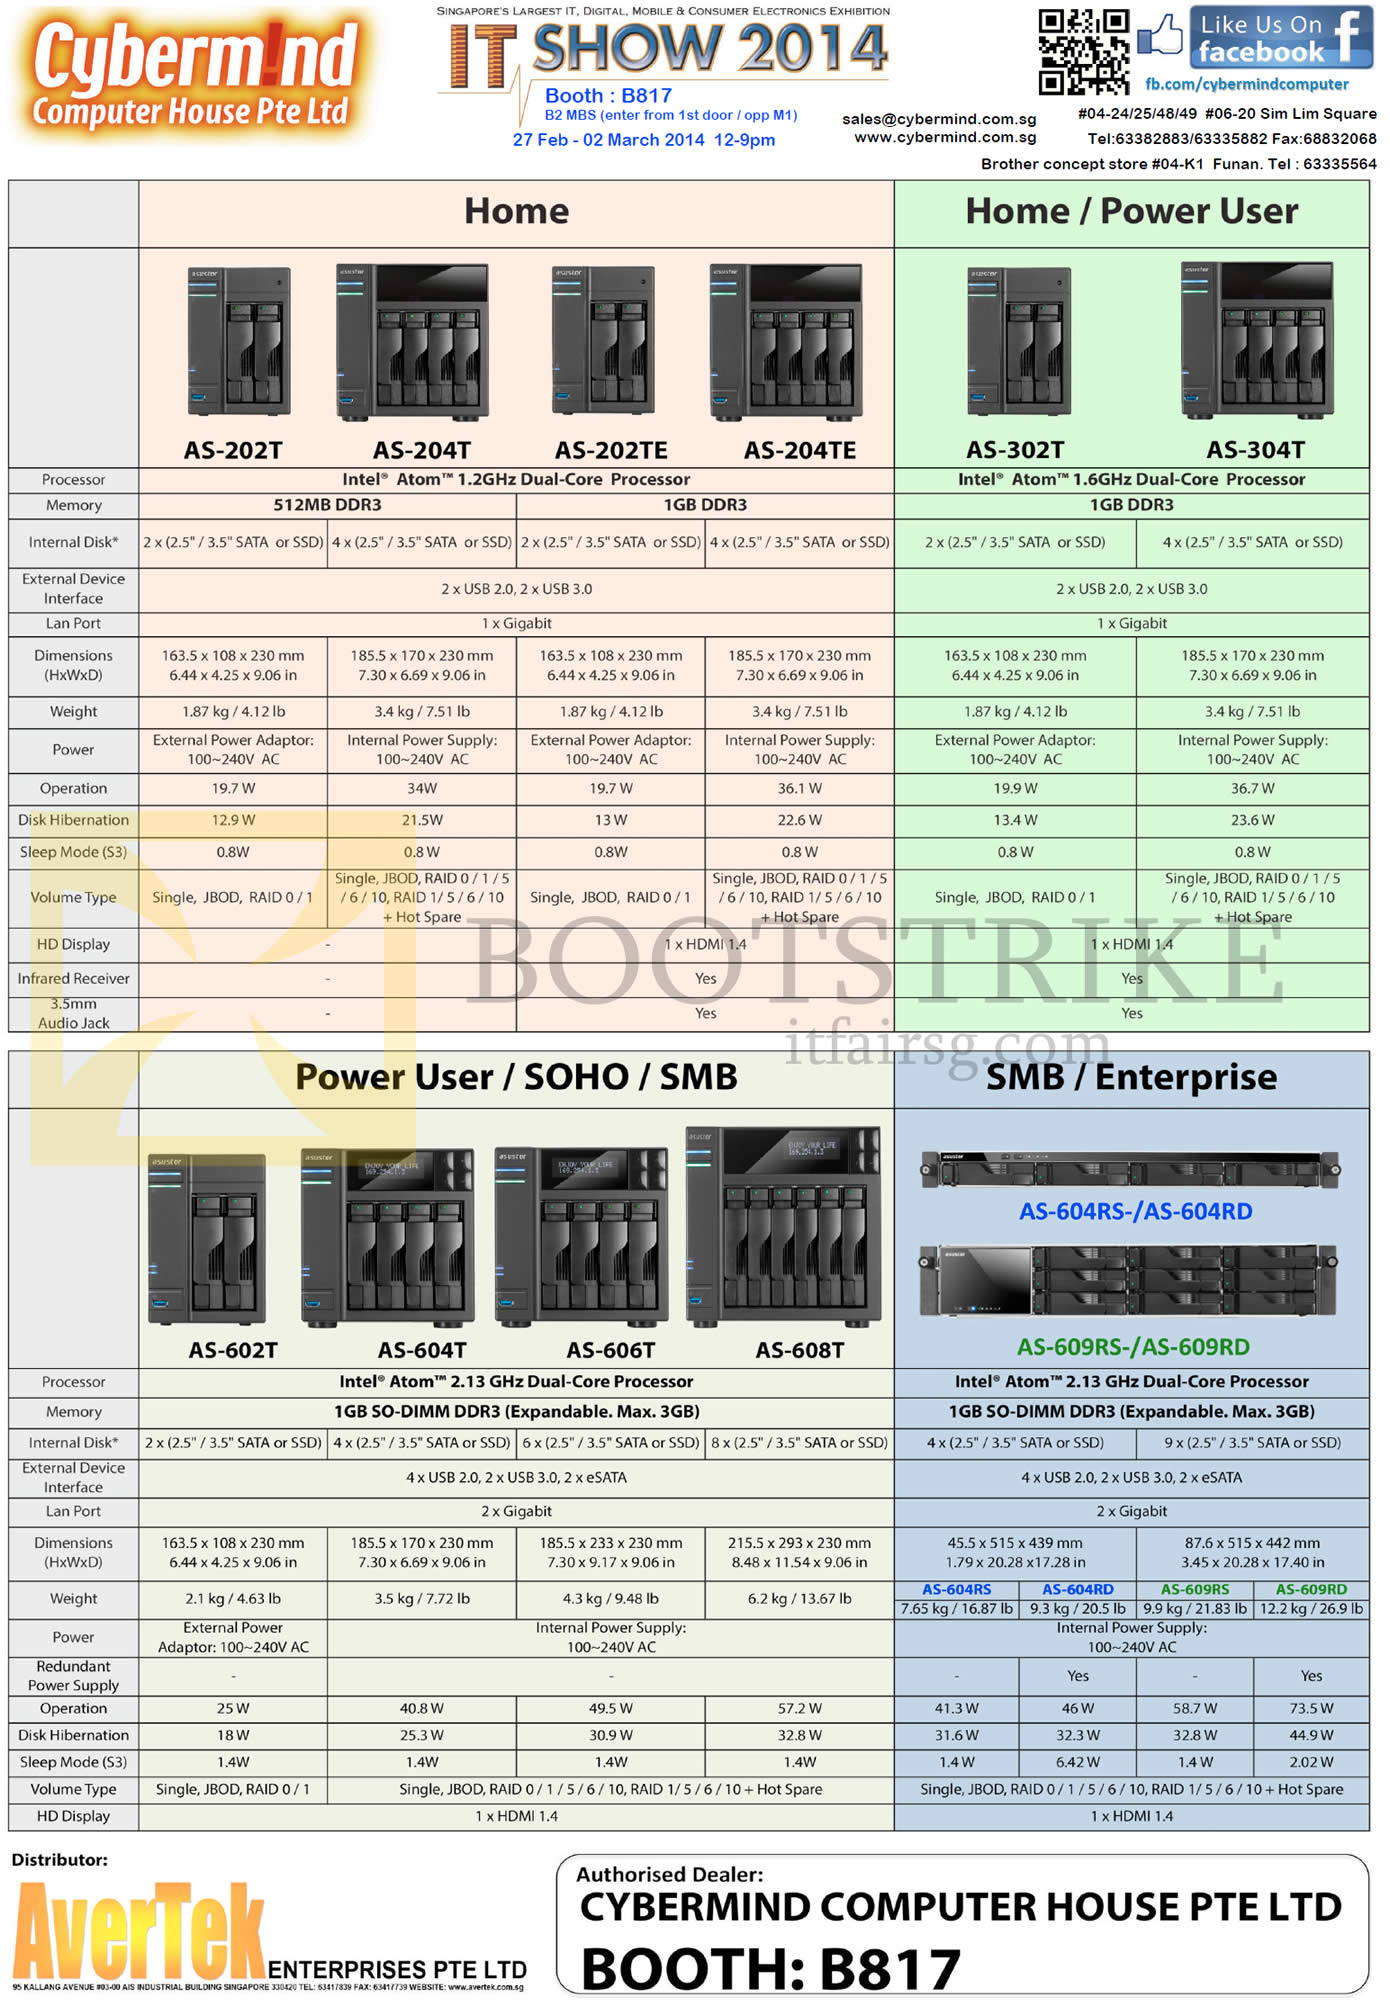 IT SHOW 2014 price list image brochure of Cybermind Asustor NAS Specifications Home User, Power User, Soho, SMB, Enterprise